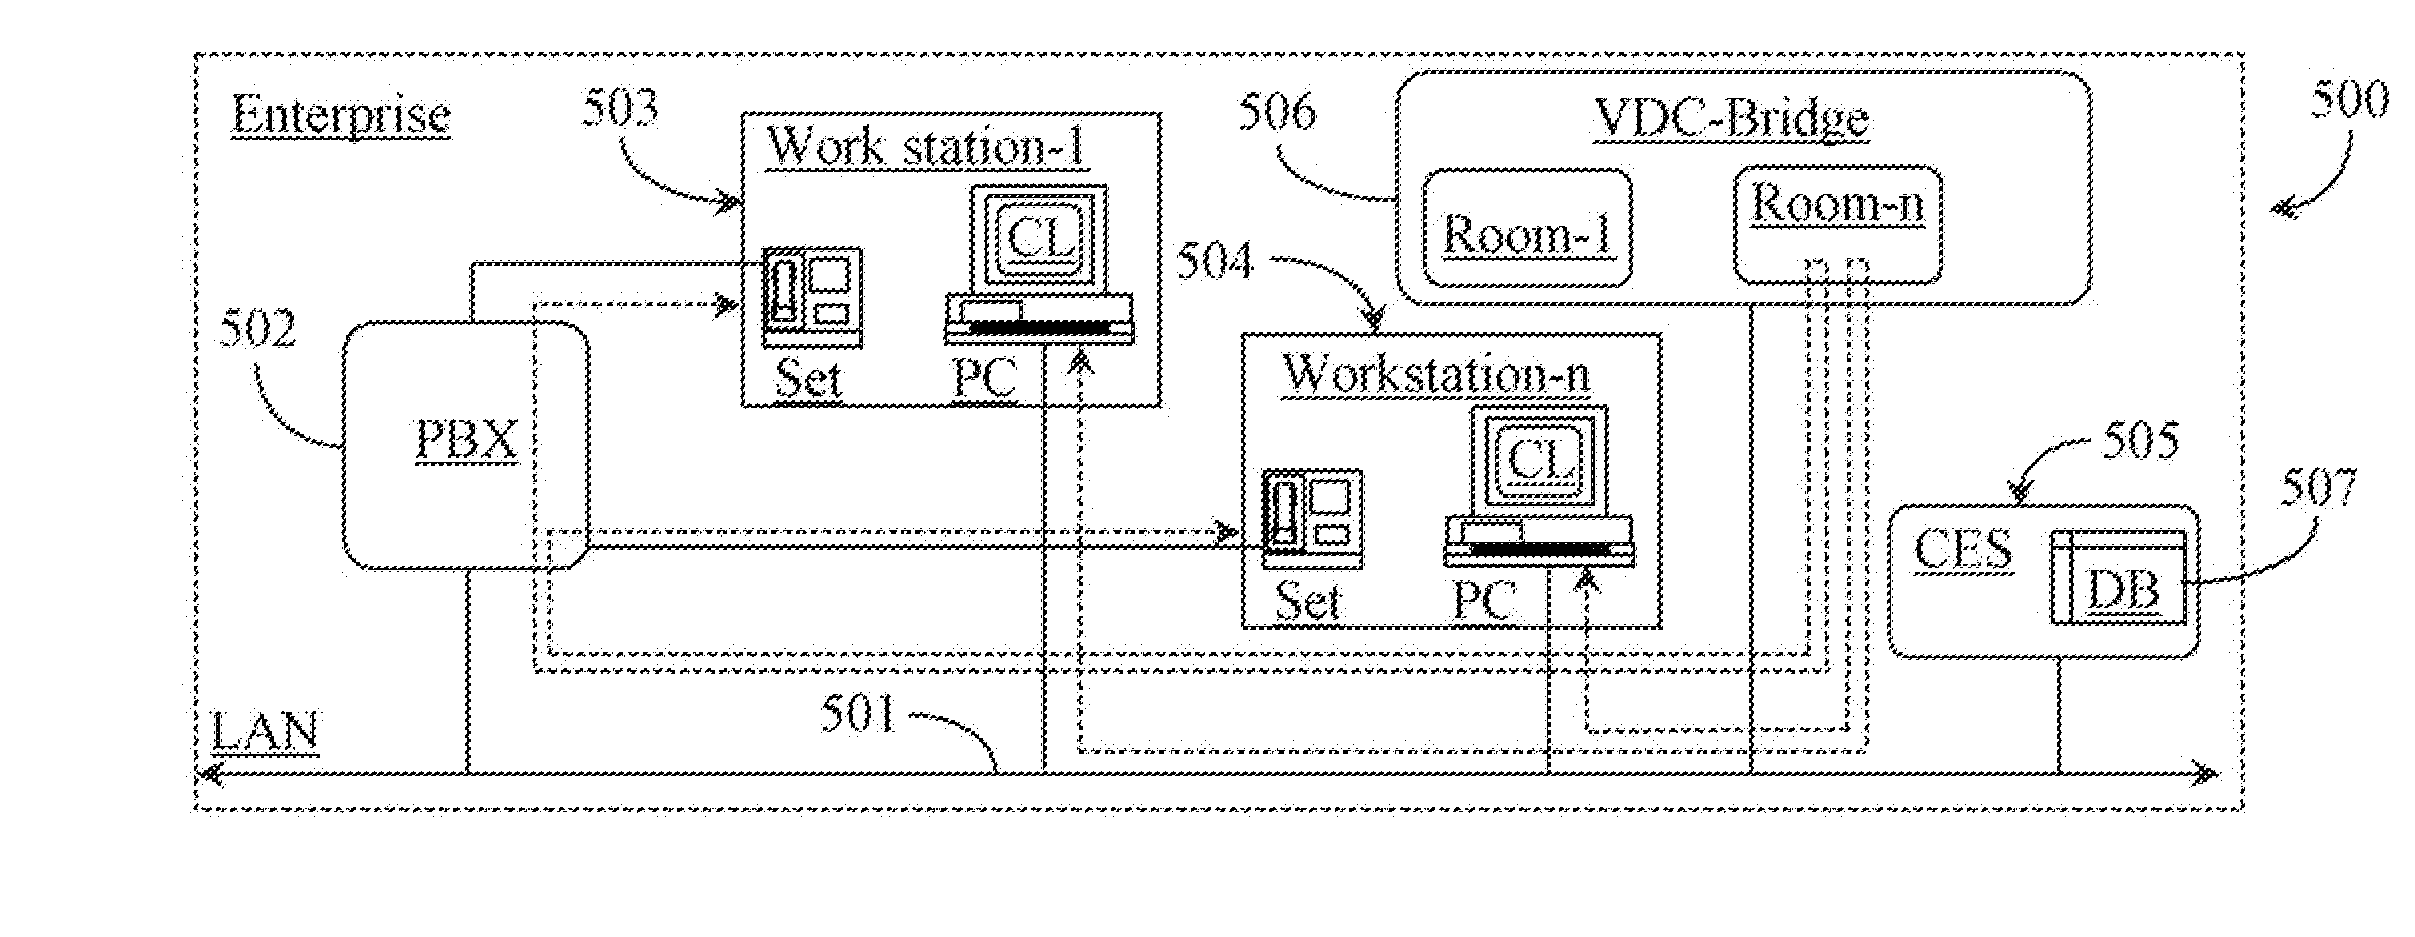 System and method for transitioning a voice session in progress over a communication network into a voice and data session